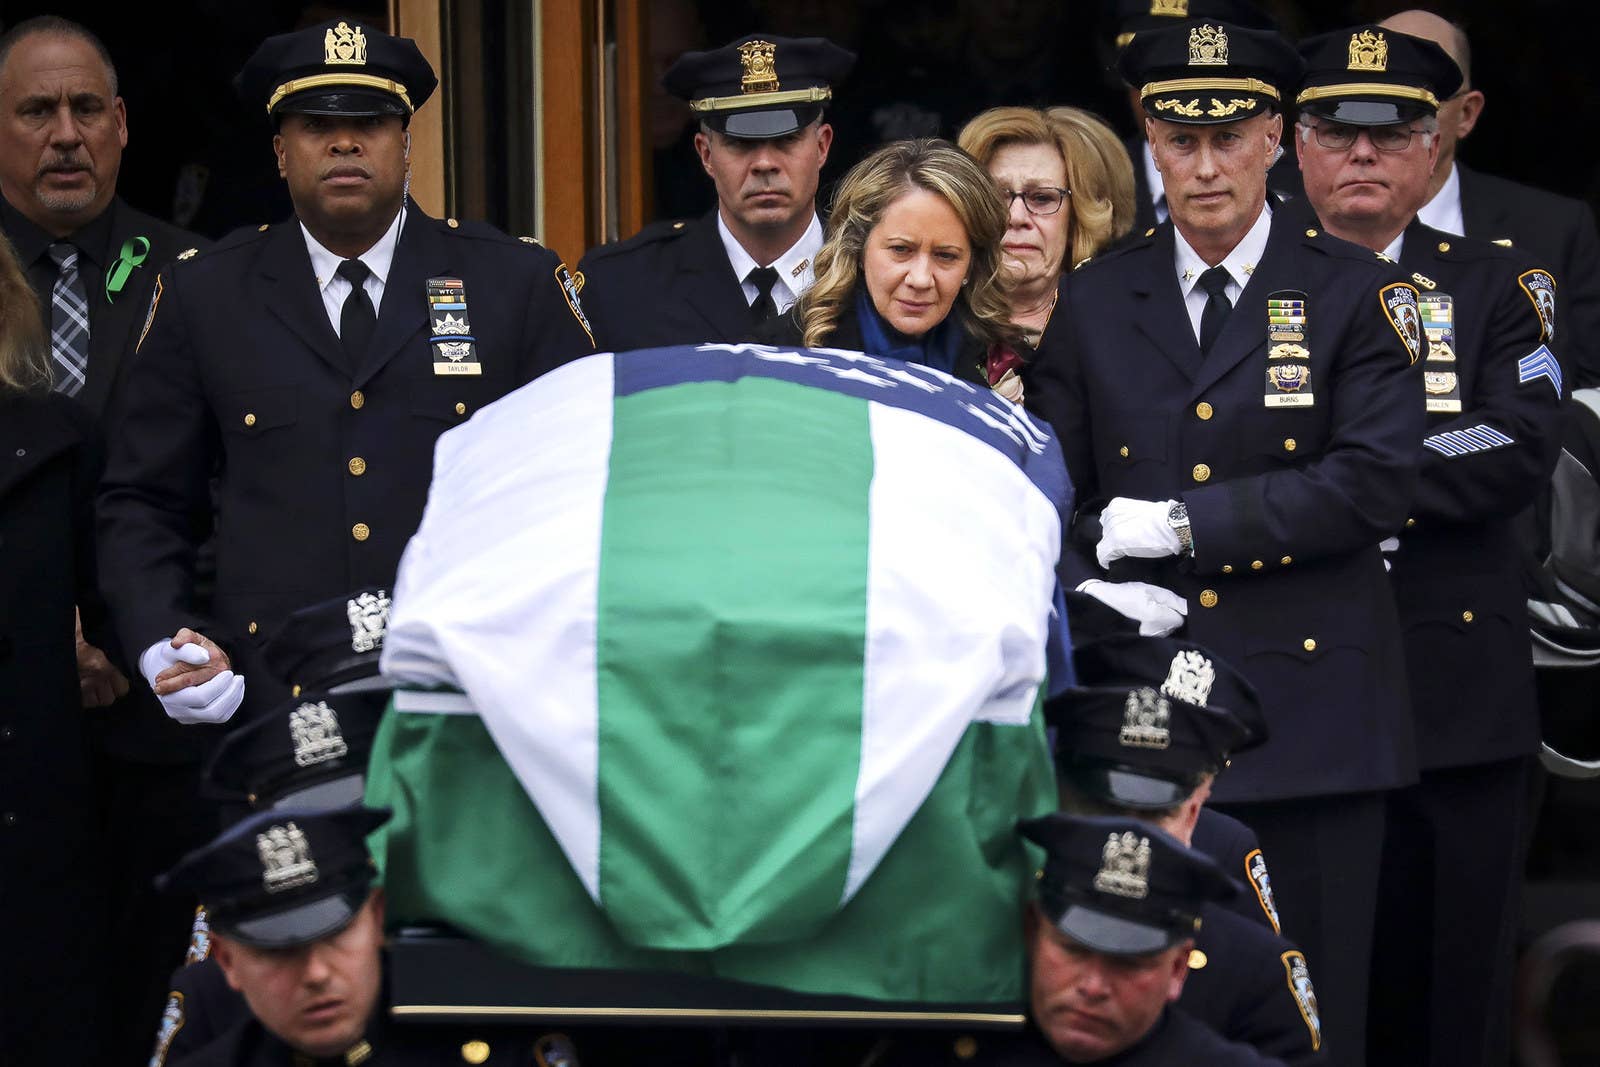 Leanne Simonsen, wife of fallen NYPD Detective Brian Simonsen, is escorted by officers as her late husband&#x27;s remains are carried out of the church following his funeral service on Feb. 20, in Hampton Bays, New York. Simonsen was killed by friendly fire while responding with fellow NYPD officers to a robbery at a store in Queens last week.